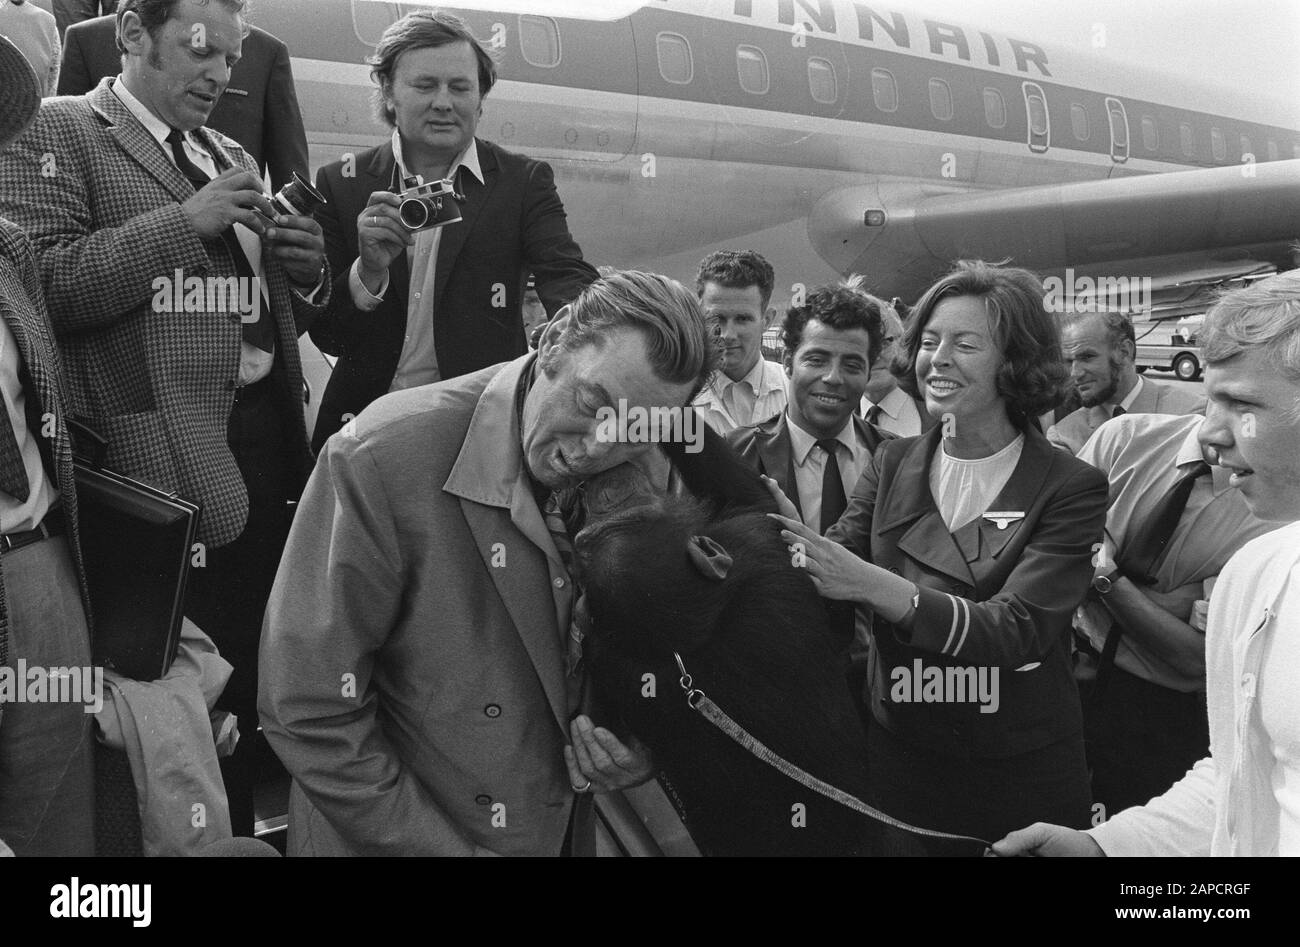 Actors Raymond Burr and ex-Tarzan Johnny Weismuller (USA) arrive at Schiphol; Weismuller with monkey Date: June 24, 1970 Keywords: ACTORS, actors Personal name: Burr, Raymond, Johnny Weismuller Stock Photo